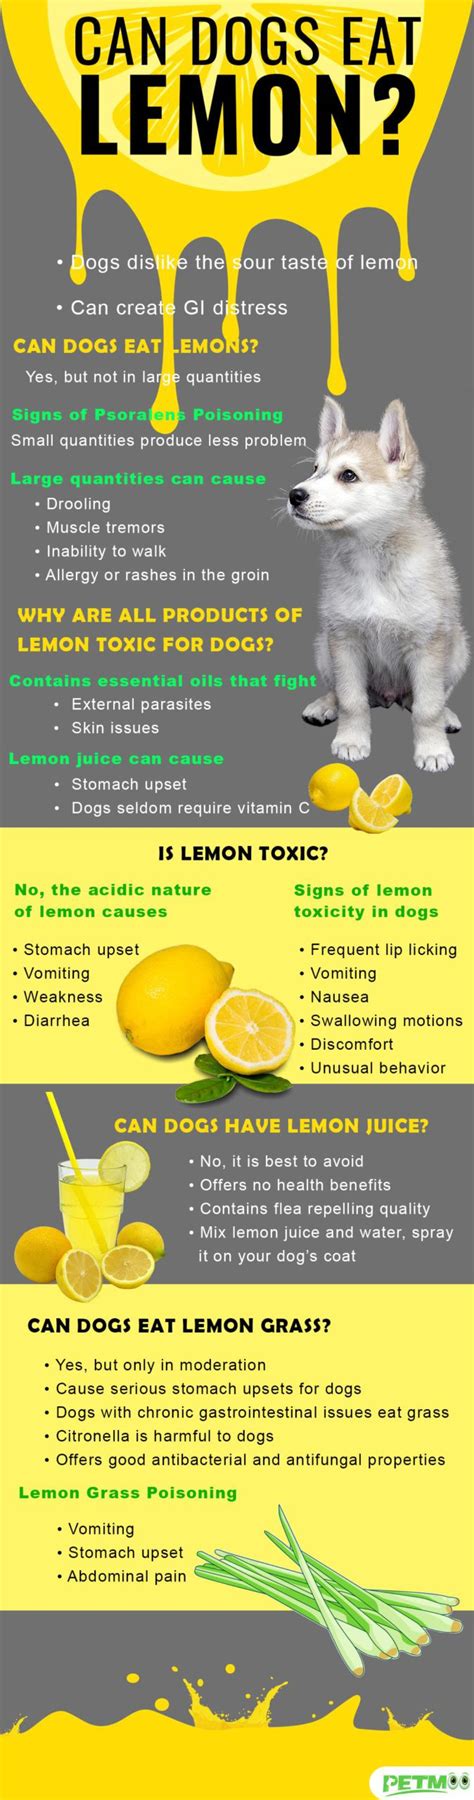 Dog ate lemon seed. Dogs can eat lemon cake but only in small amounts. Lemon cakes don’t include anything dangerous for dogs, but too much will cause indigestion and/or other related digestive issues. …. If you go with a simple lemon pound cake, the results will be good and the dog is going to love the treat. 